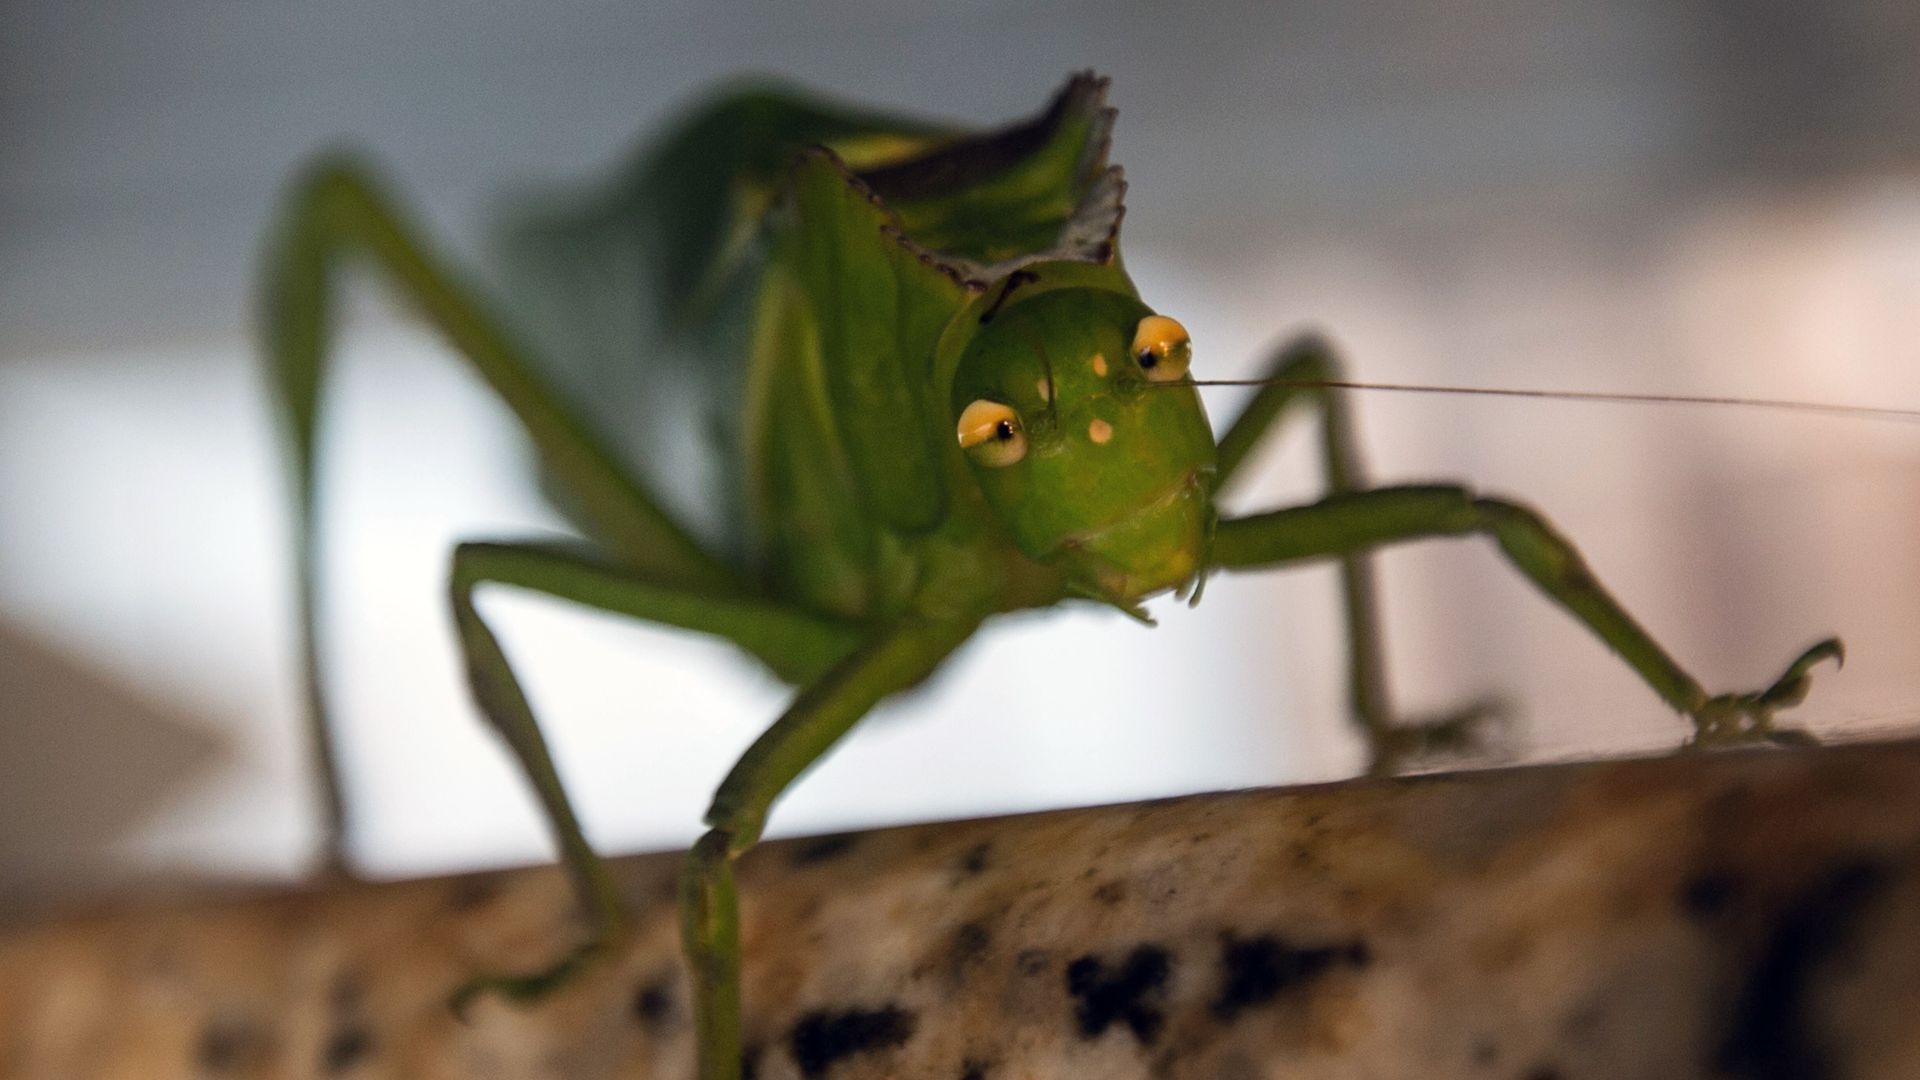 An insect with a green body and yellow eyes in Amazonia, Brazil.